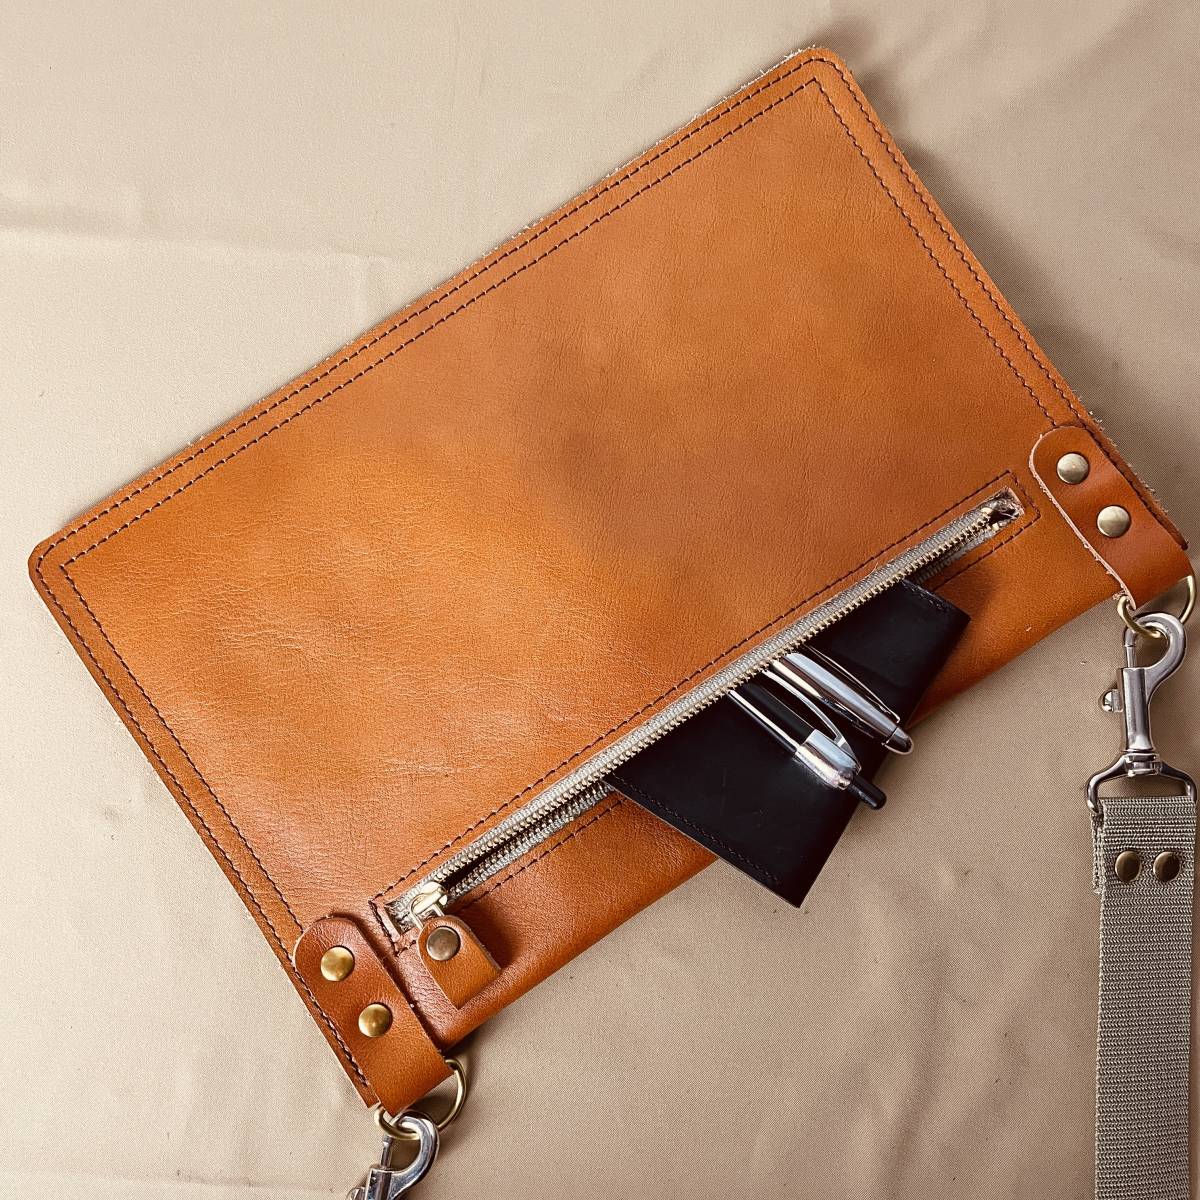  meat thickness also ... Camel leather extremely thick cow leather . hand. 2WAY original leather body bag M leather sakoshu clutch also hand made B124